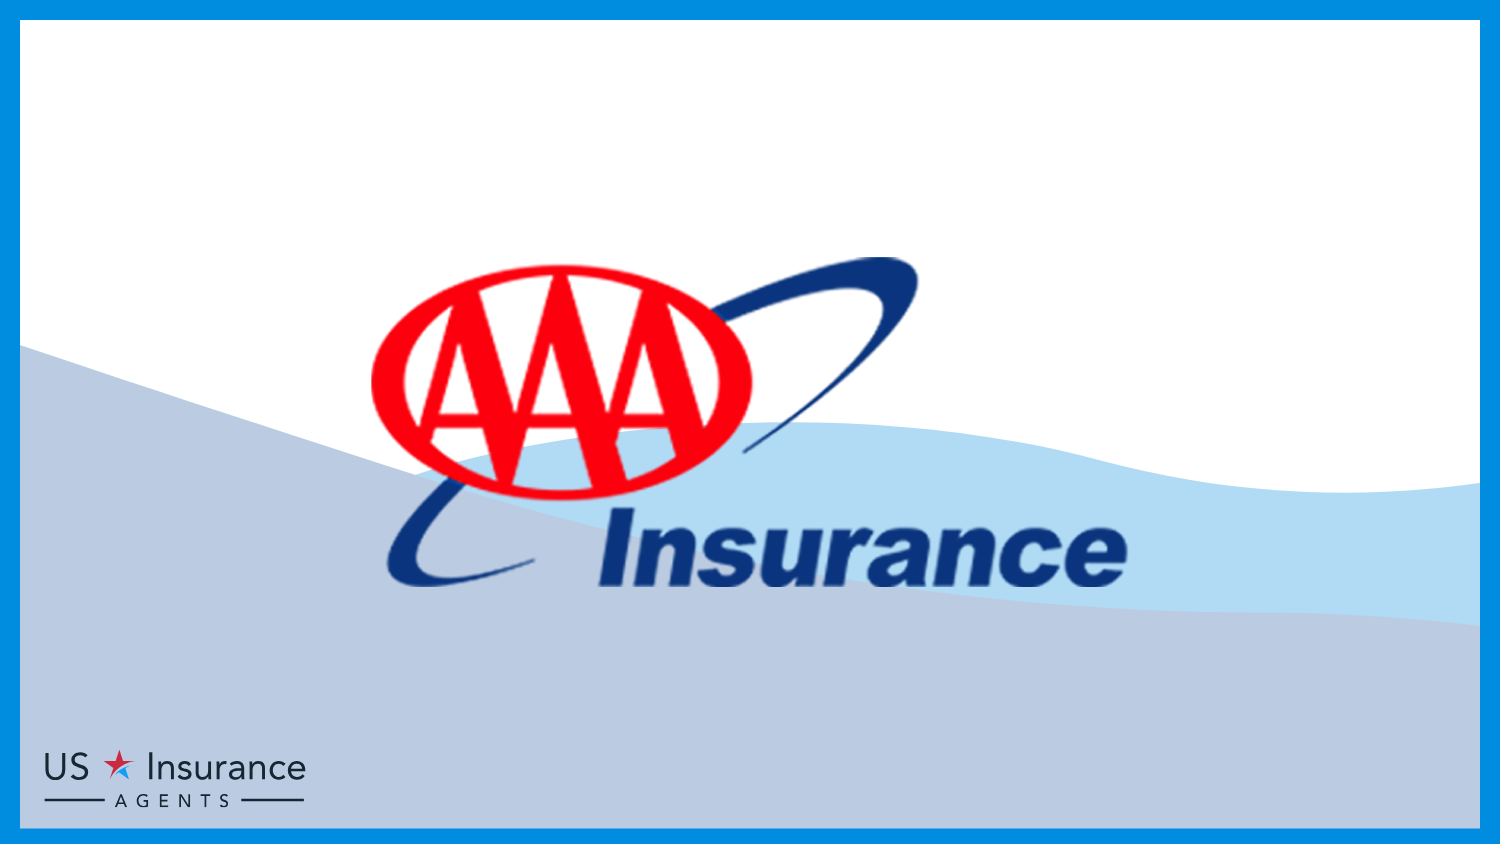 AAA: Best Business Insurance for Catering Services